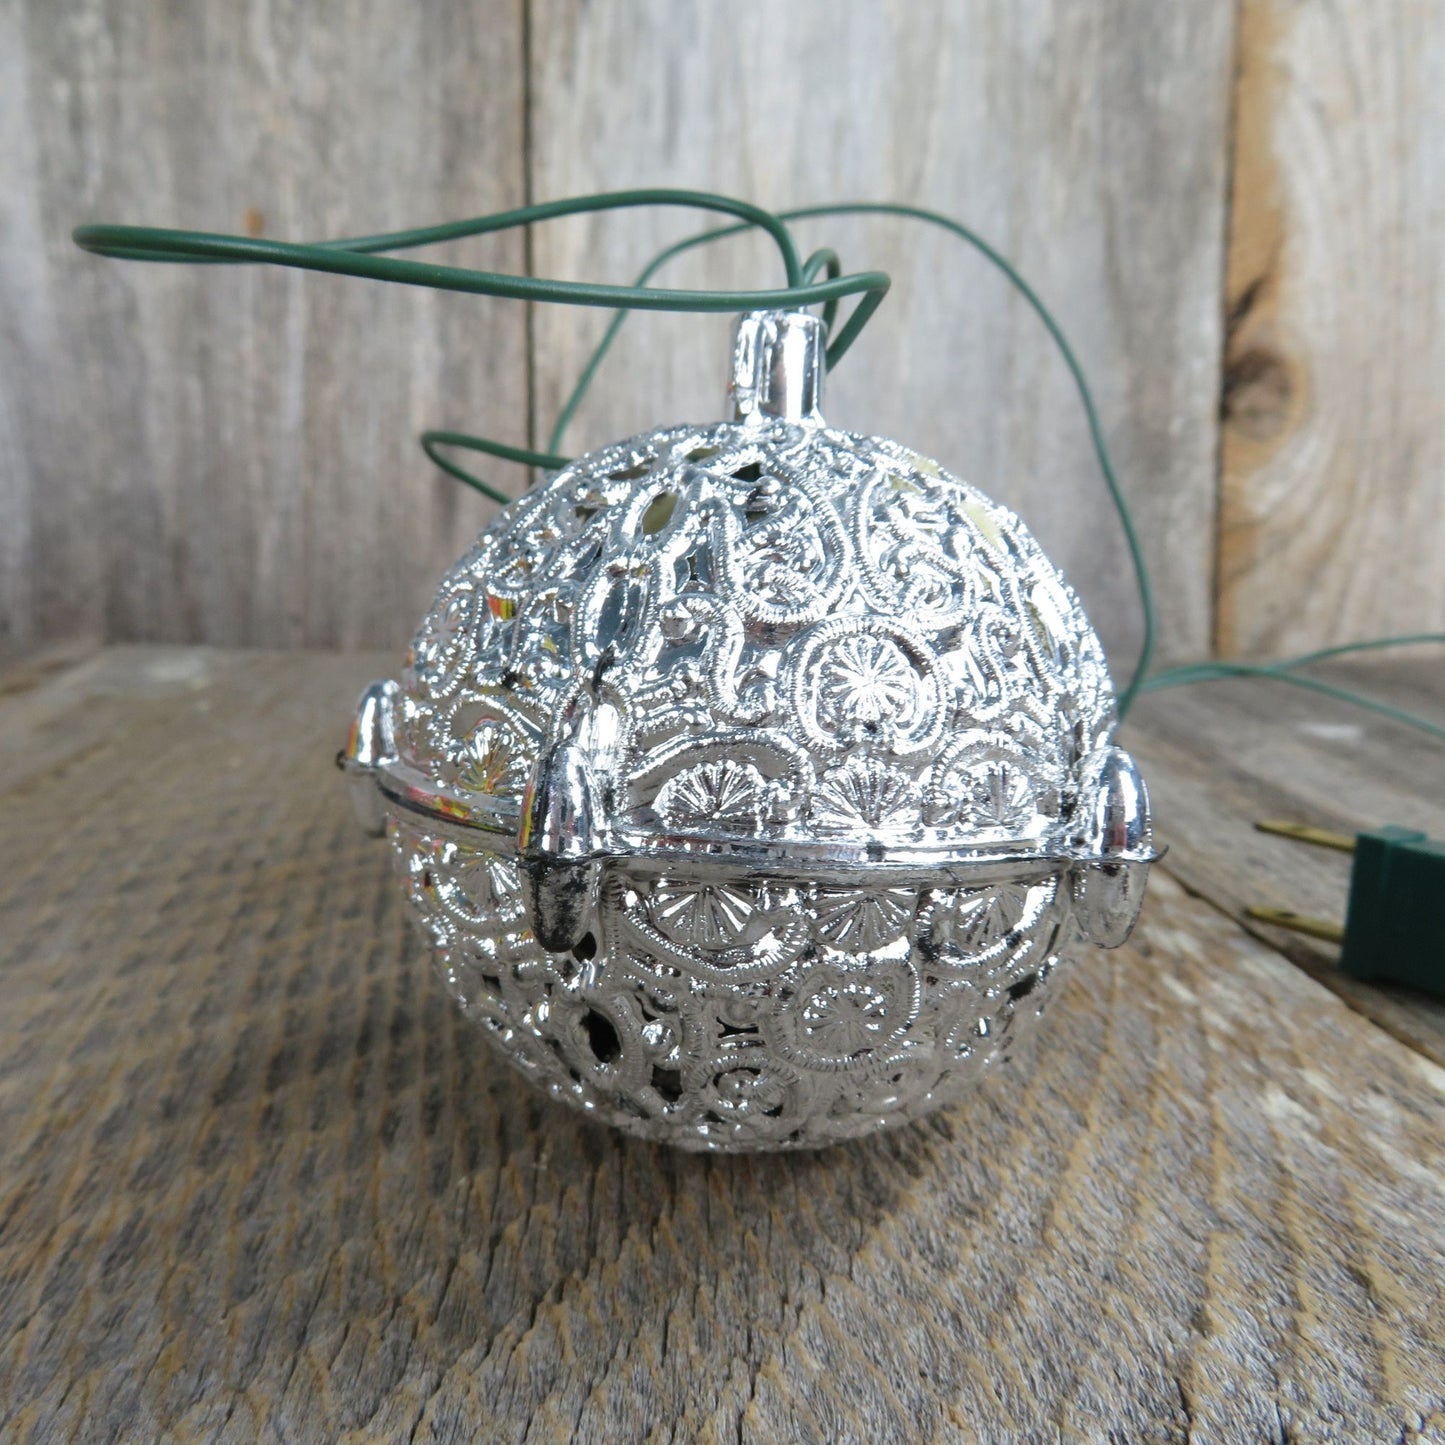 Vintage Chirping Bird Ornament Everglow Electronic Chirp Christmas Silver Ball Singing Video